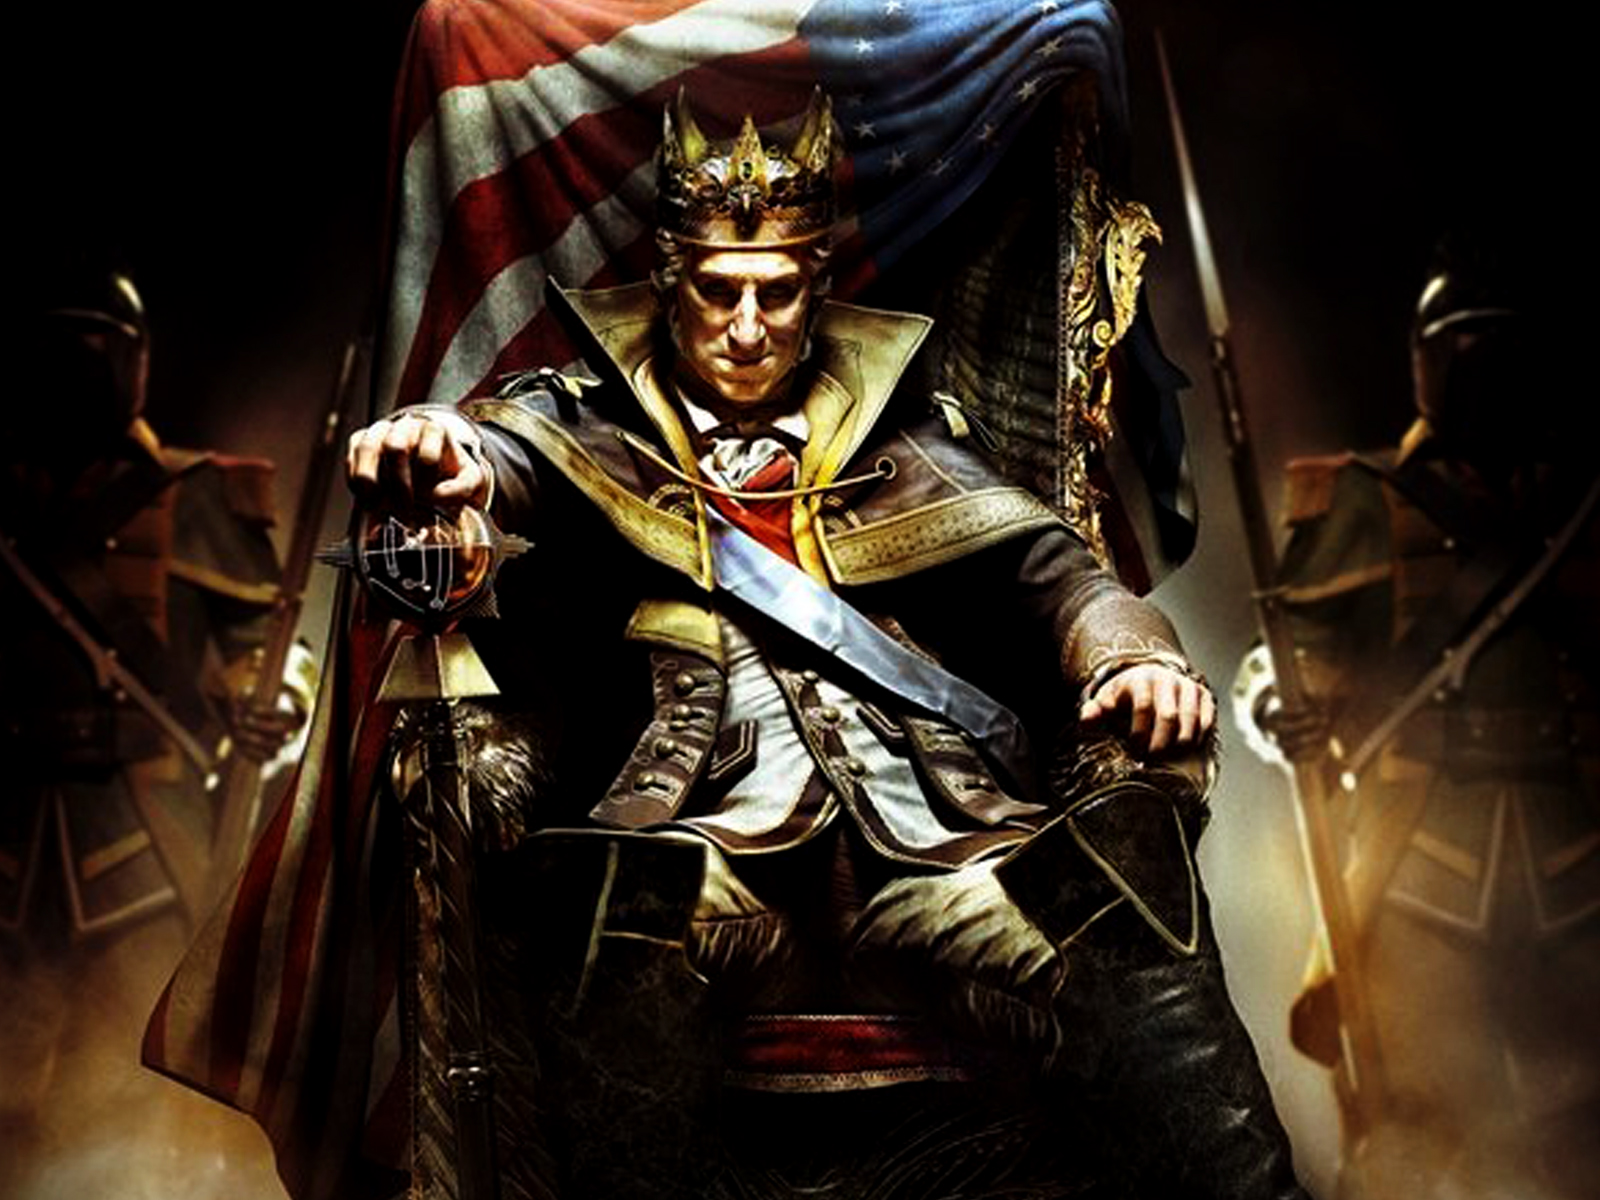 george washington wallpaper,fictional character,movie,pc game,darkness,action film